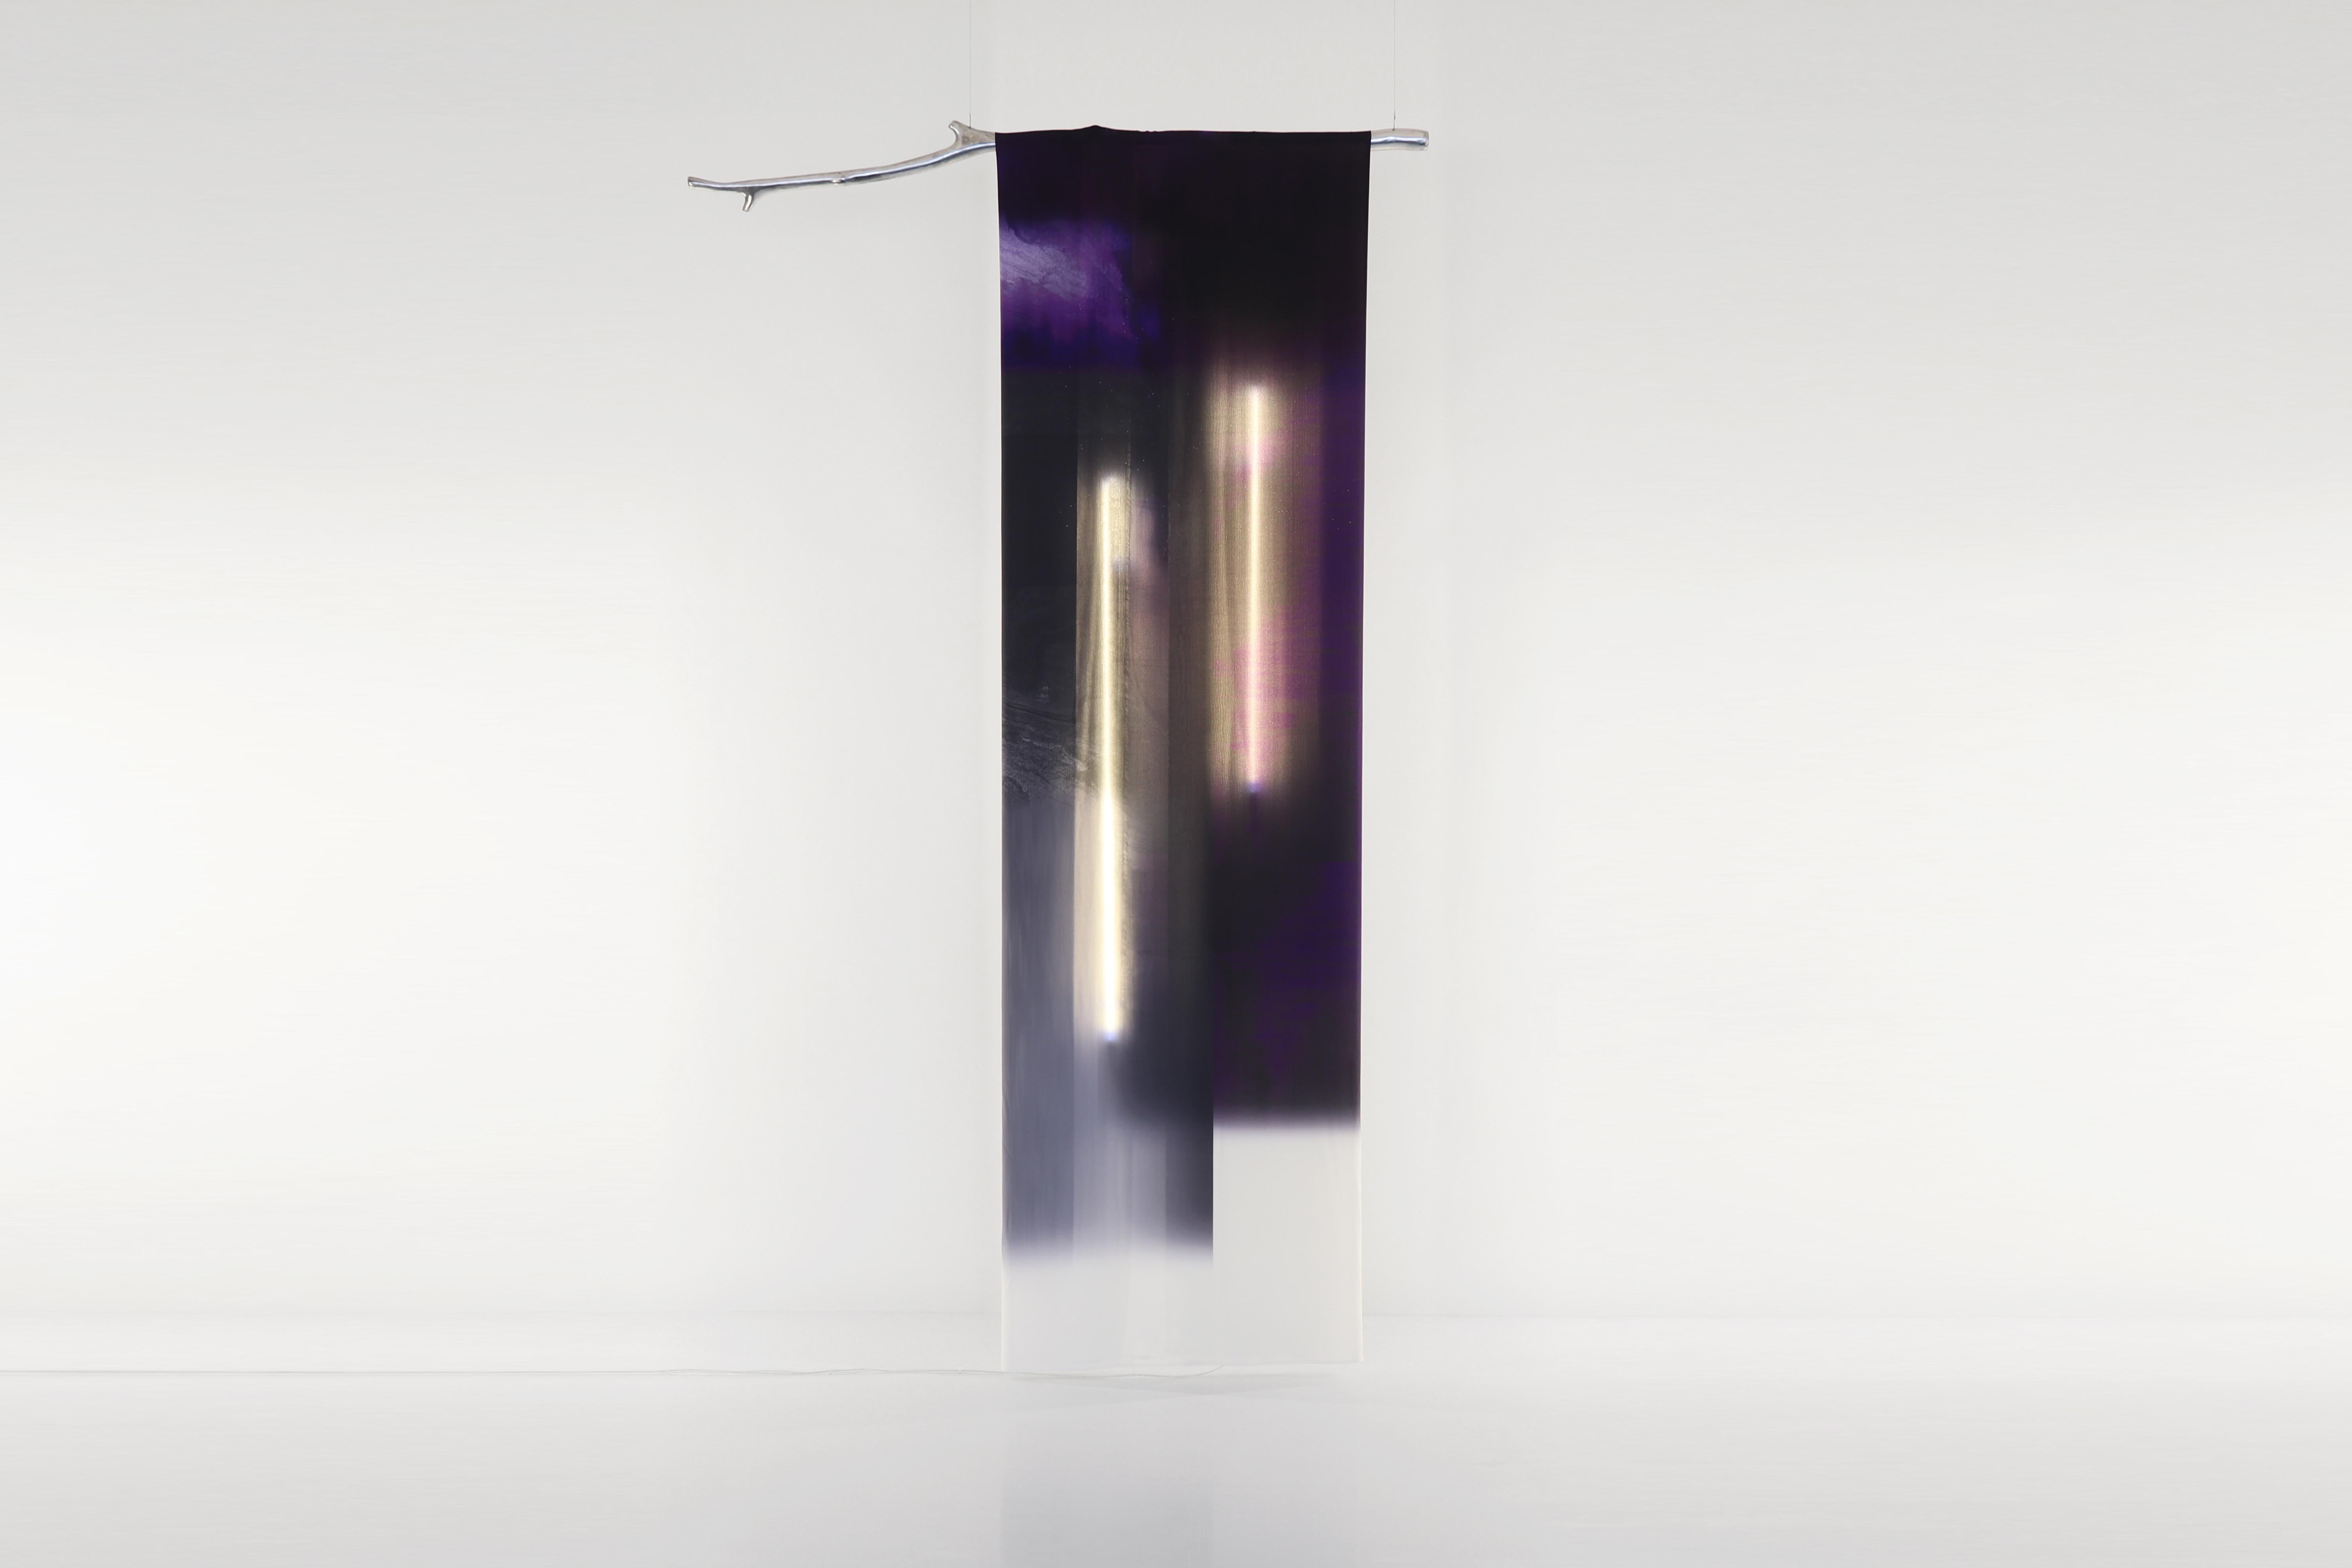 Longing for the Space Between Stars Purple Fabric Light by Batten and Kamp
Dimensions: D70 x H100 cm
Materials: Digital print on silk, Cast aluminium, hand-crafted neon light, electrics.

All our lamps can be wired according to each country. If